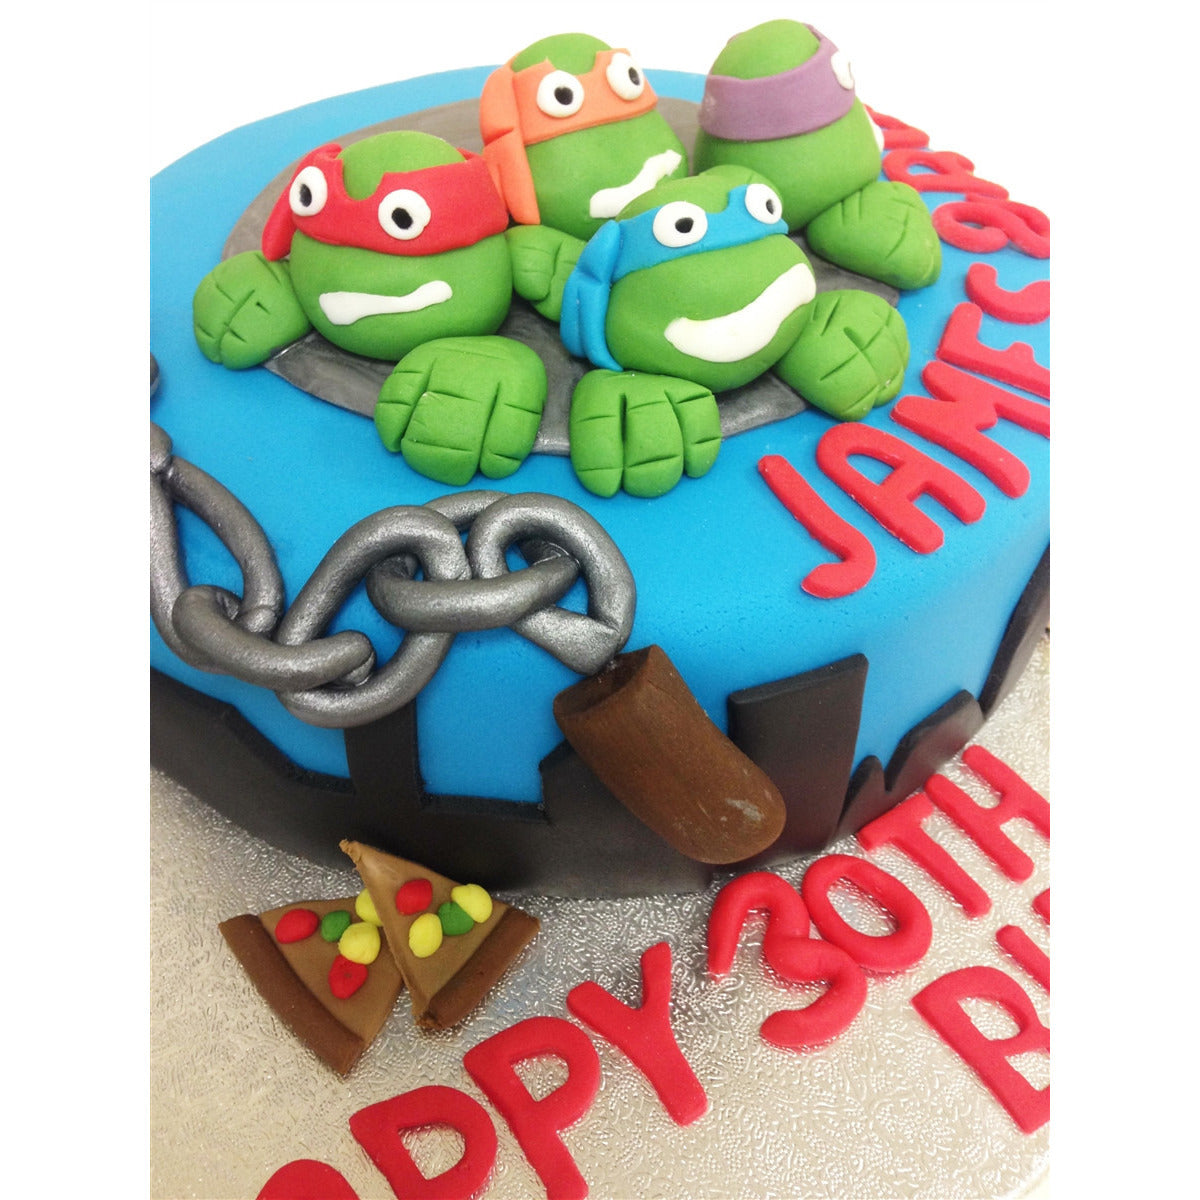 The Pastry Chef's Baking: Chocolate Turtle Cake